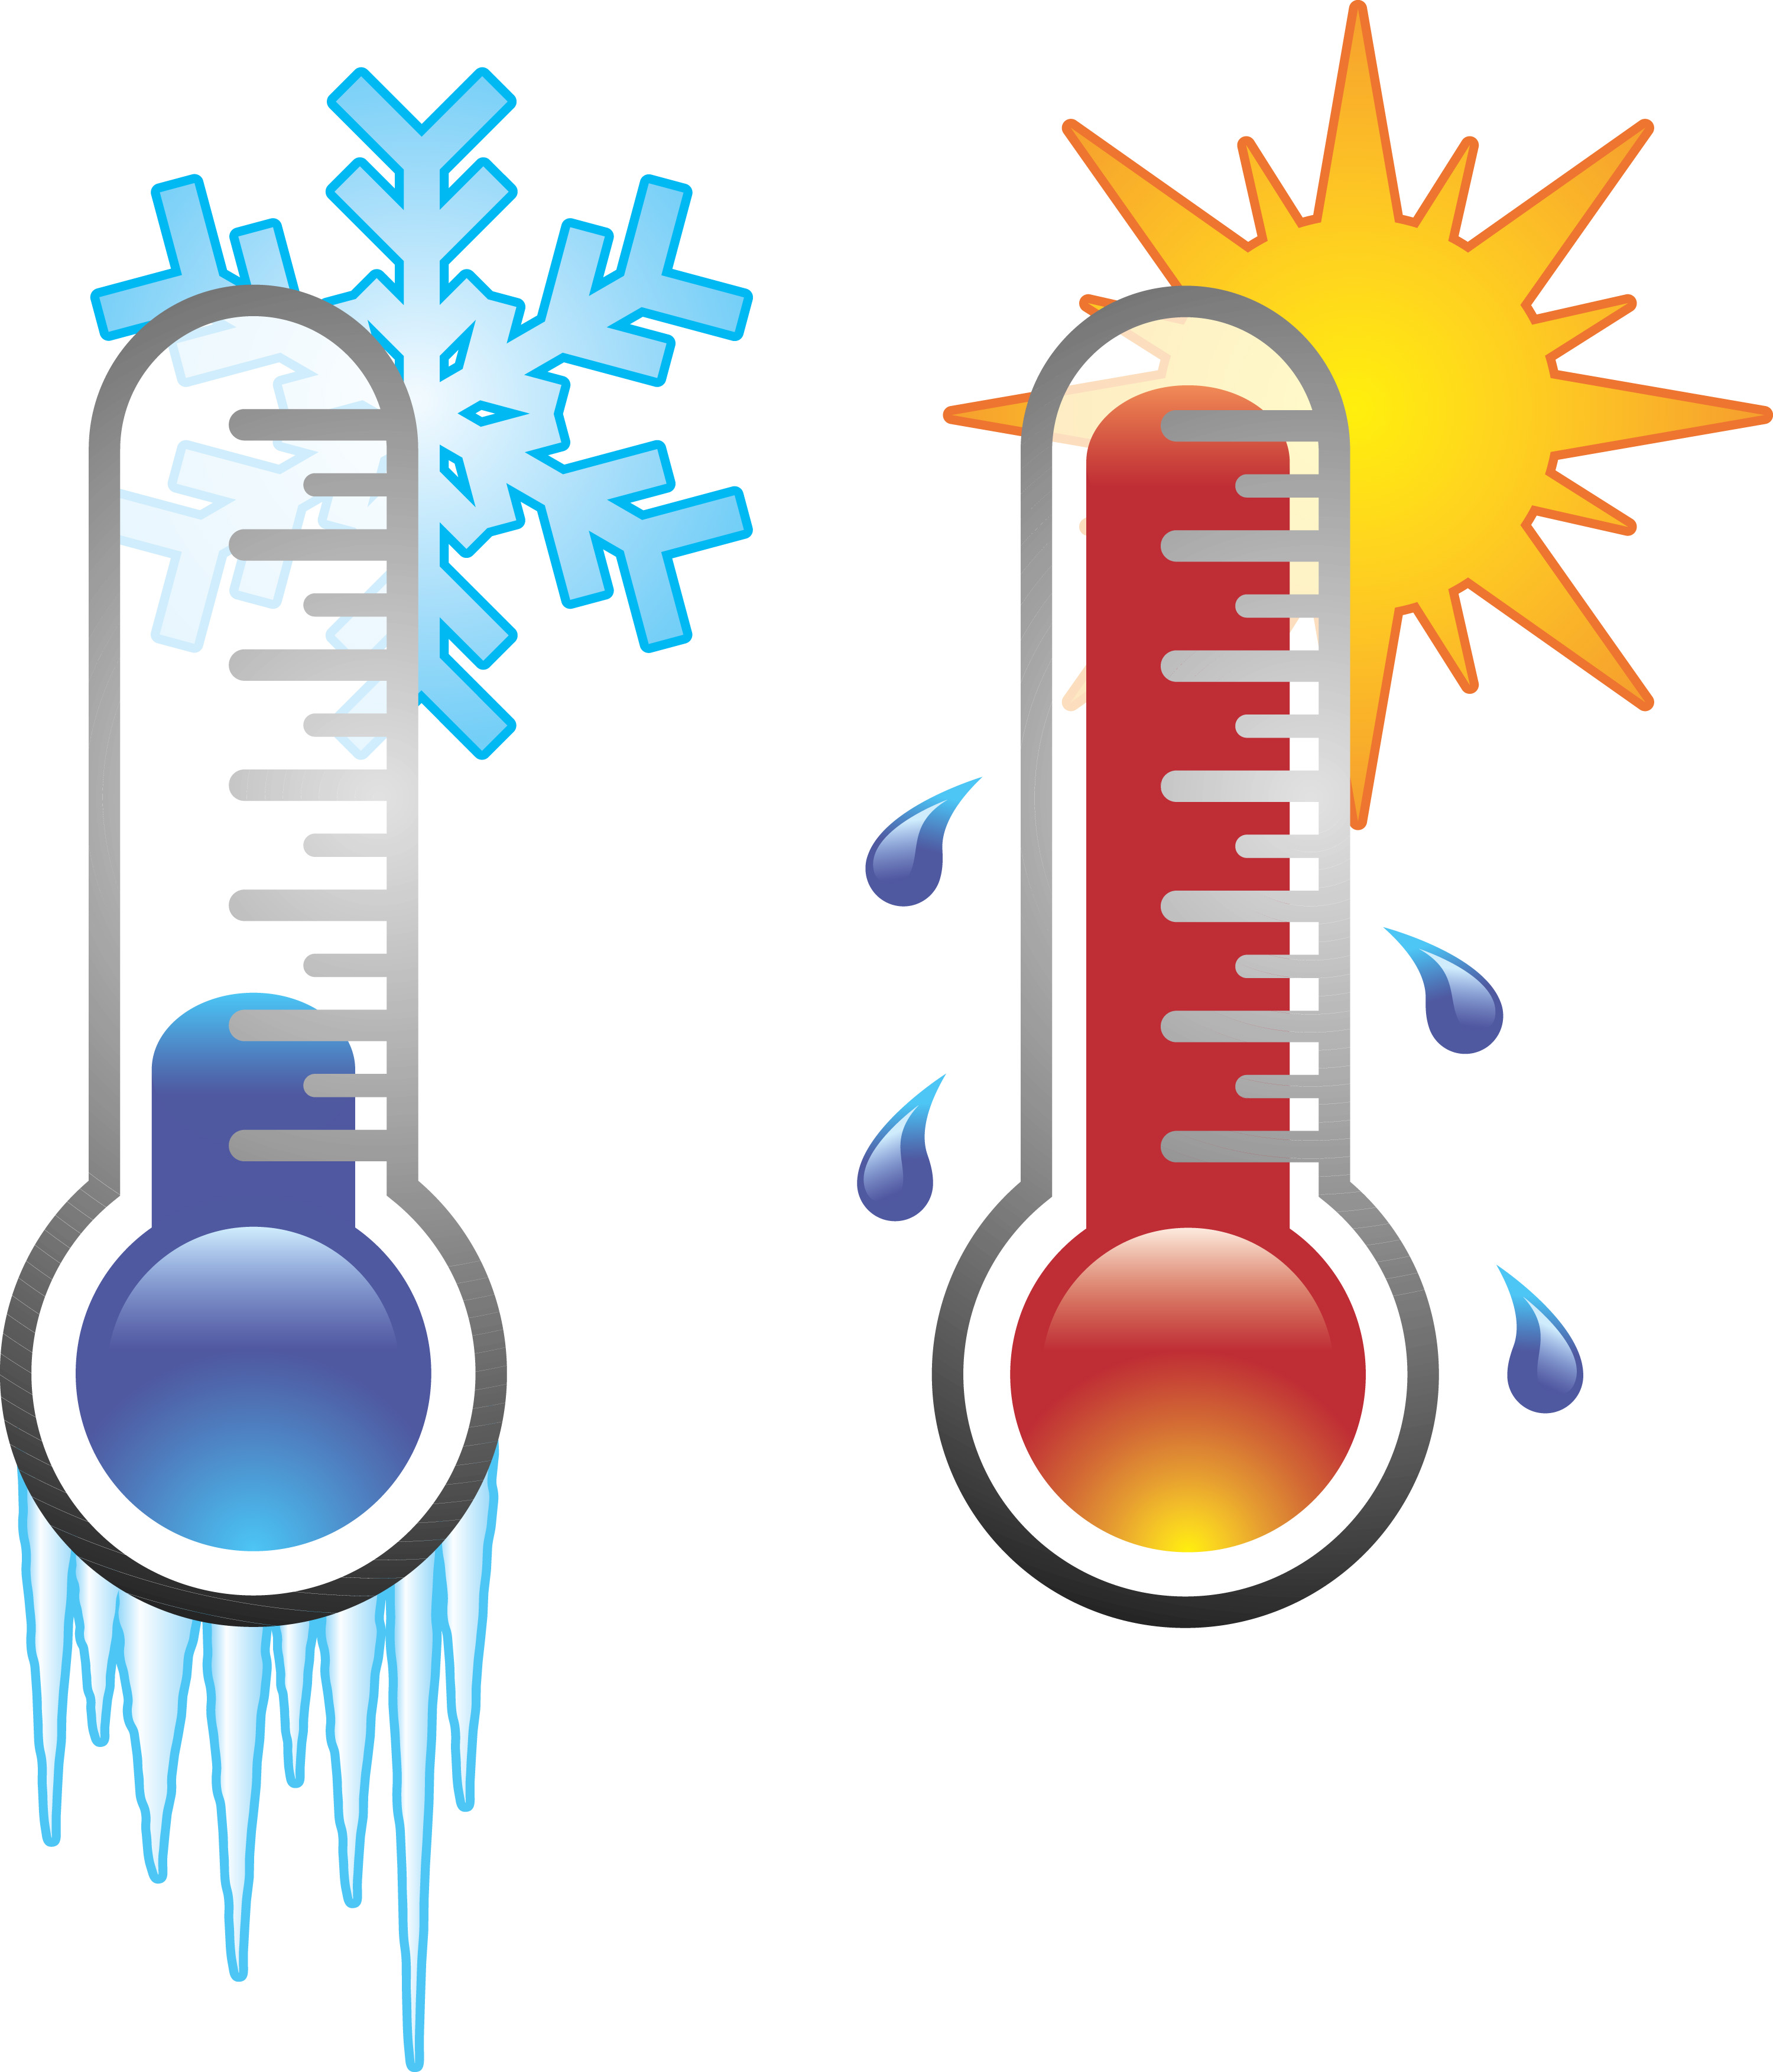 Fundraising thermometer clip art free clipart images 4.